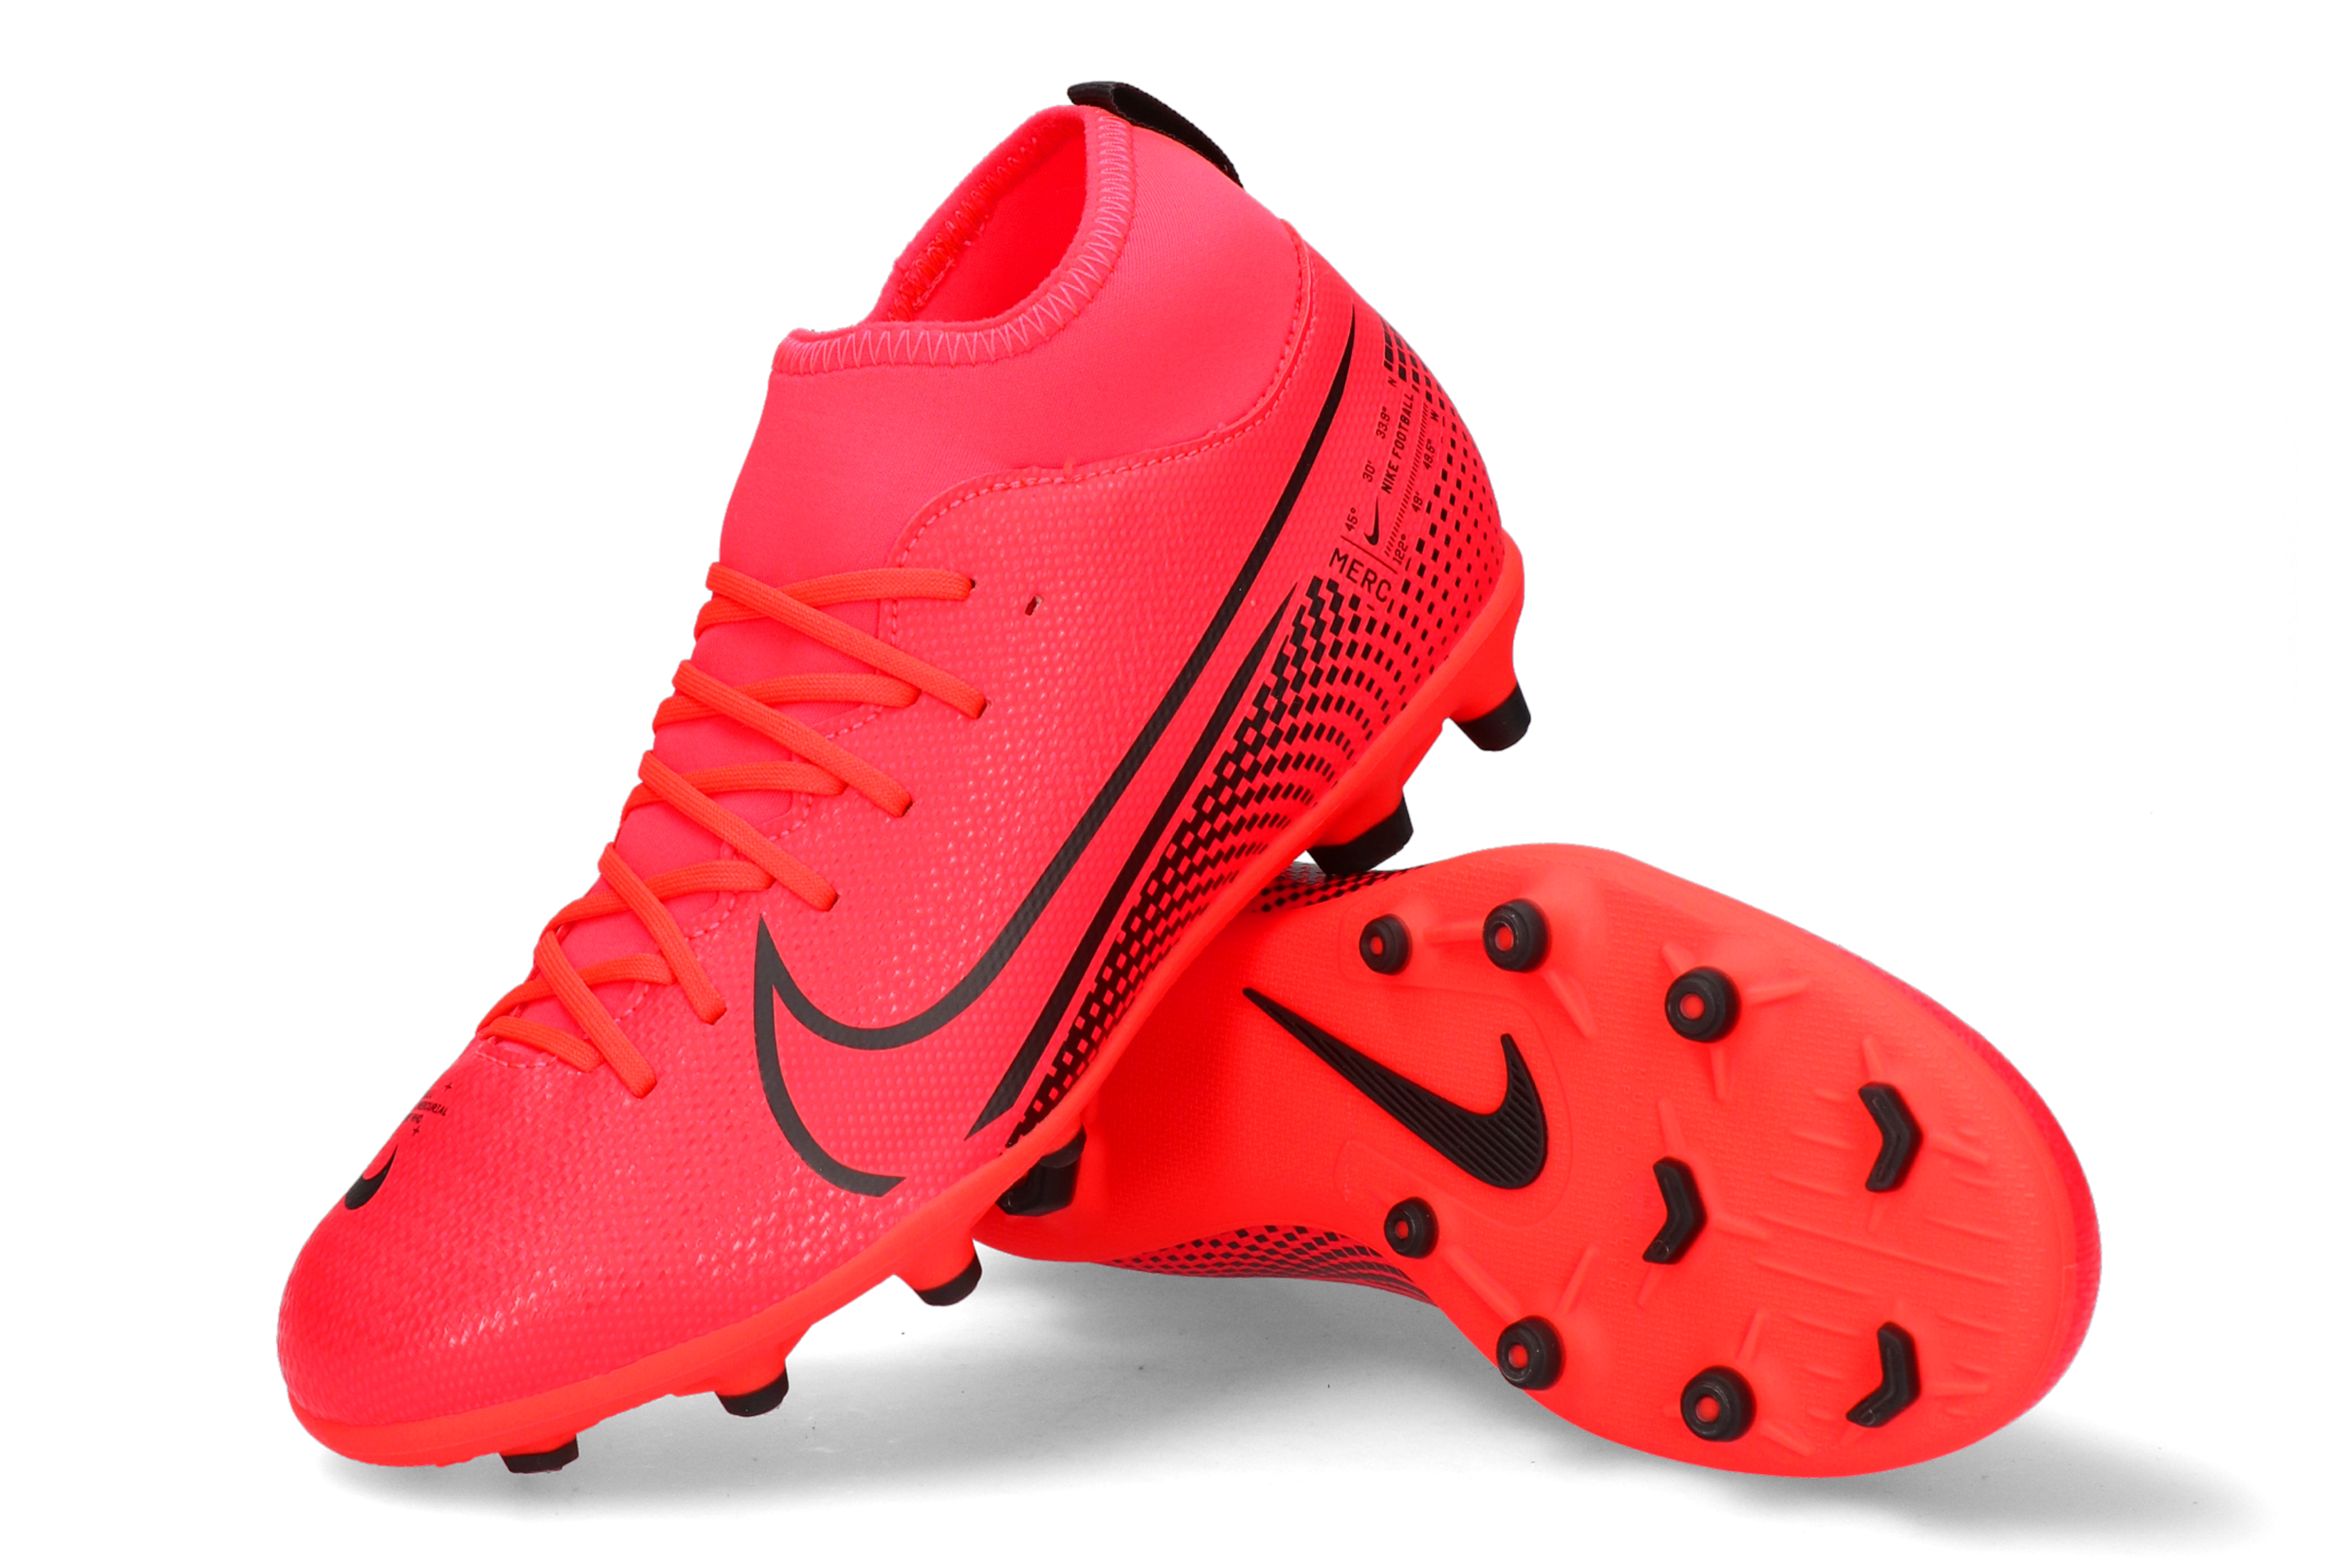 Halovky Nike Mercurial Superfly 7 Club IC M AT7979 001.